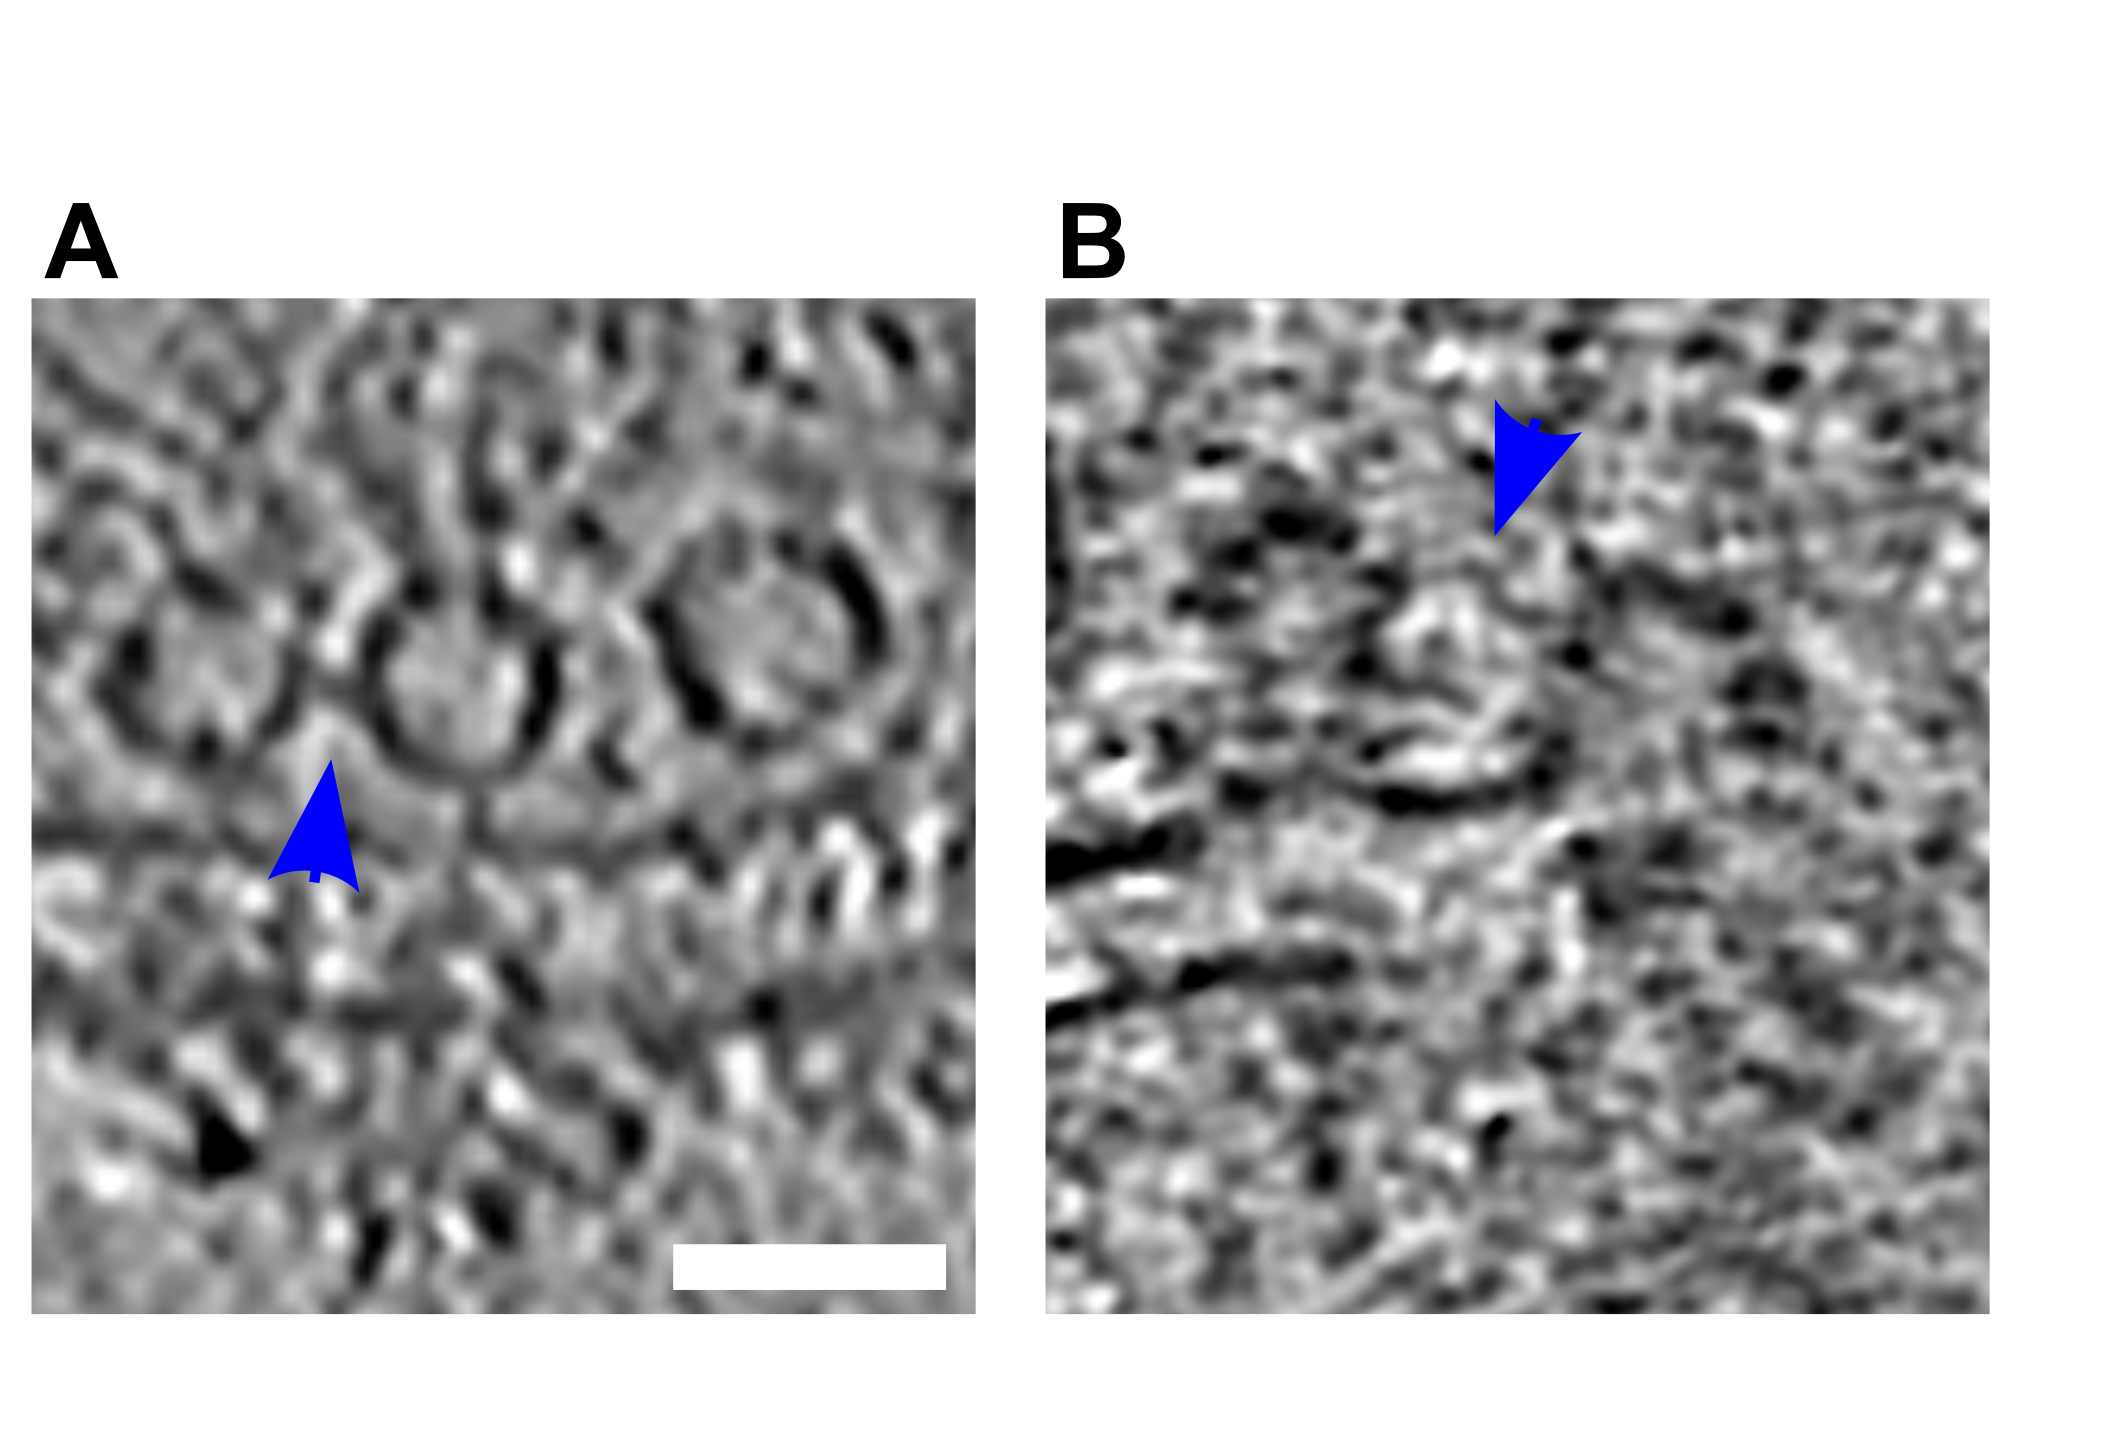 Figure S4: (A, B) Tomographic slices showing tethered connected vesicles. Blue arrows highlight the connectors. Scale bar, 50 nm.